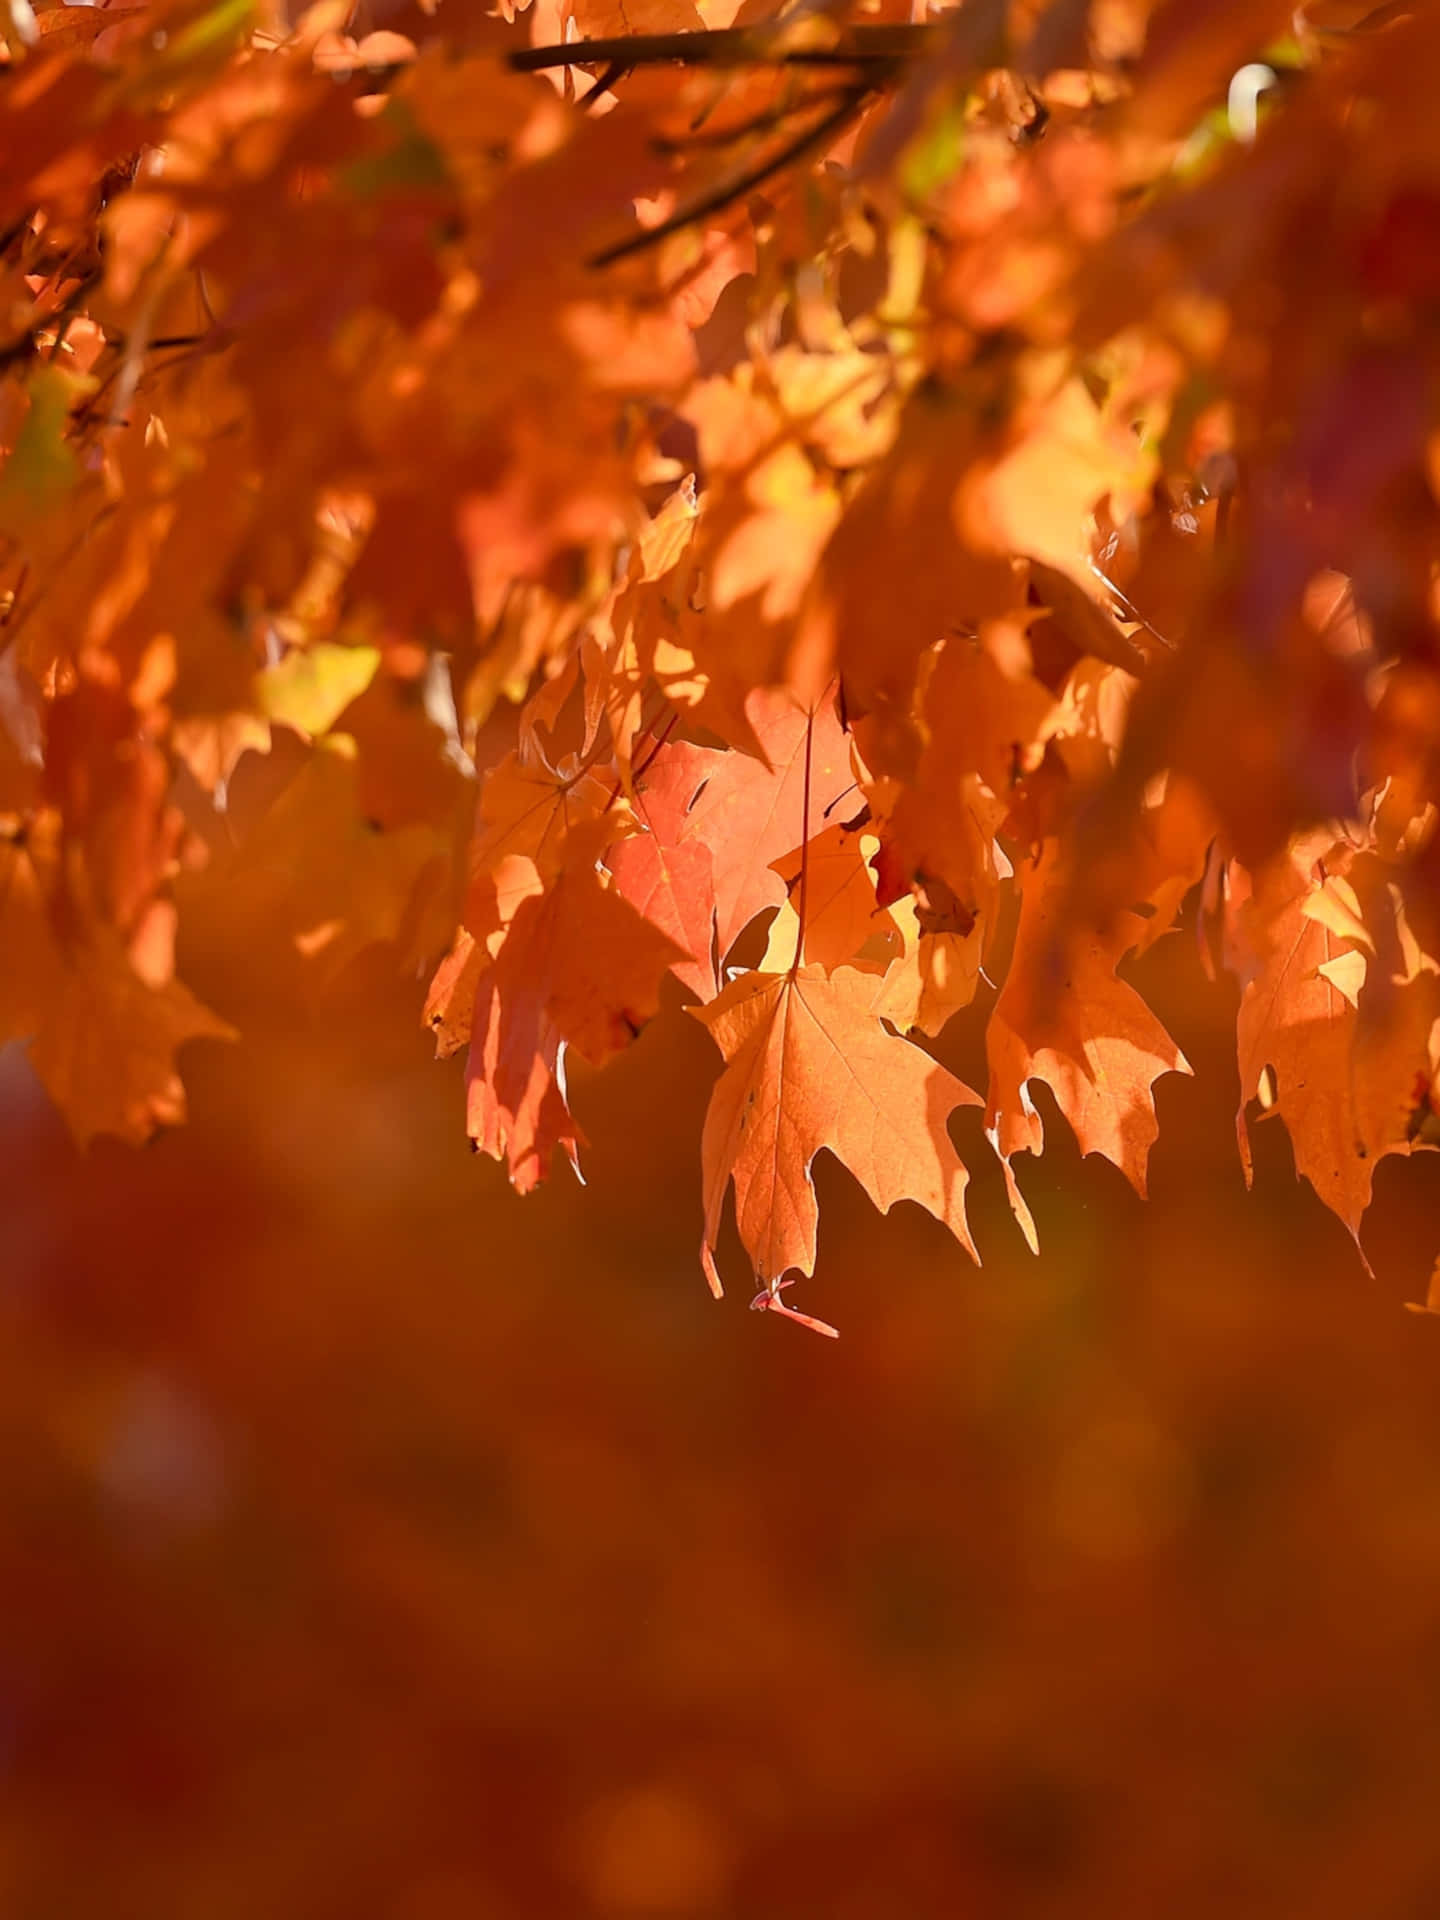 Autumn Leaves In The Fall Wallpaper